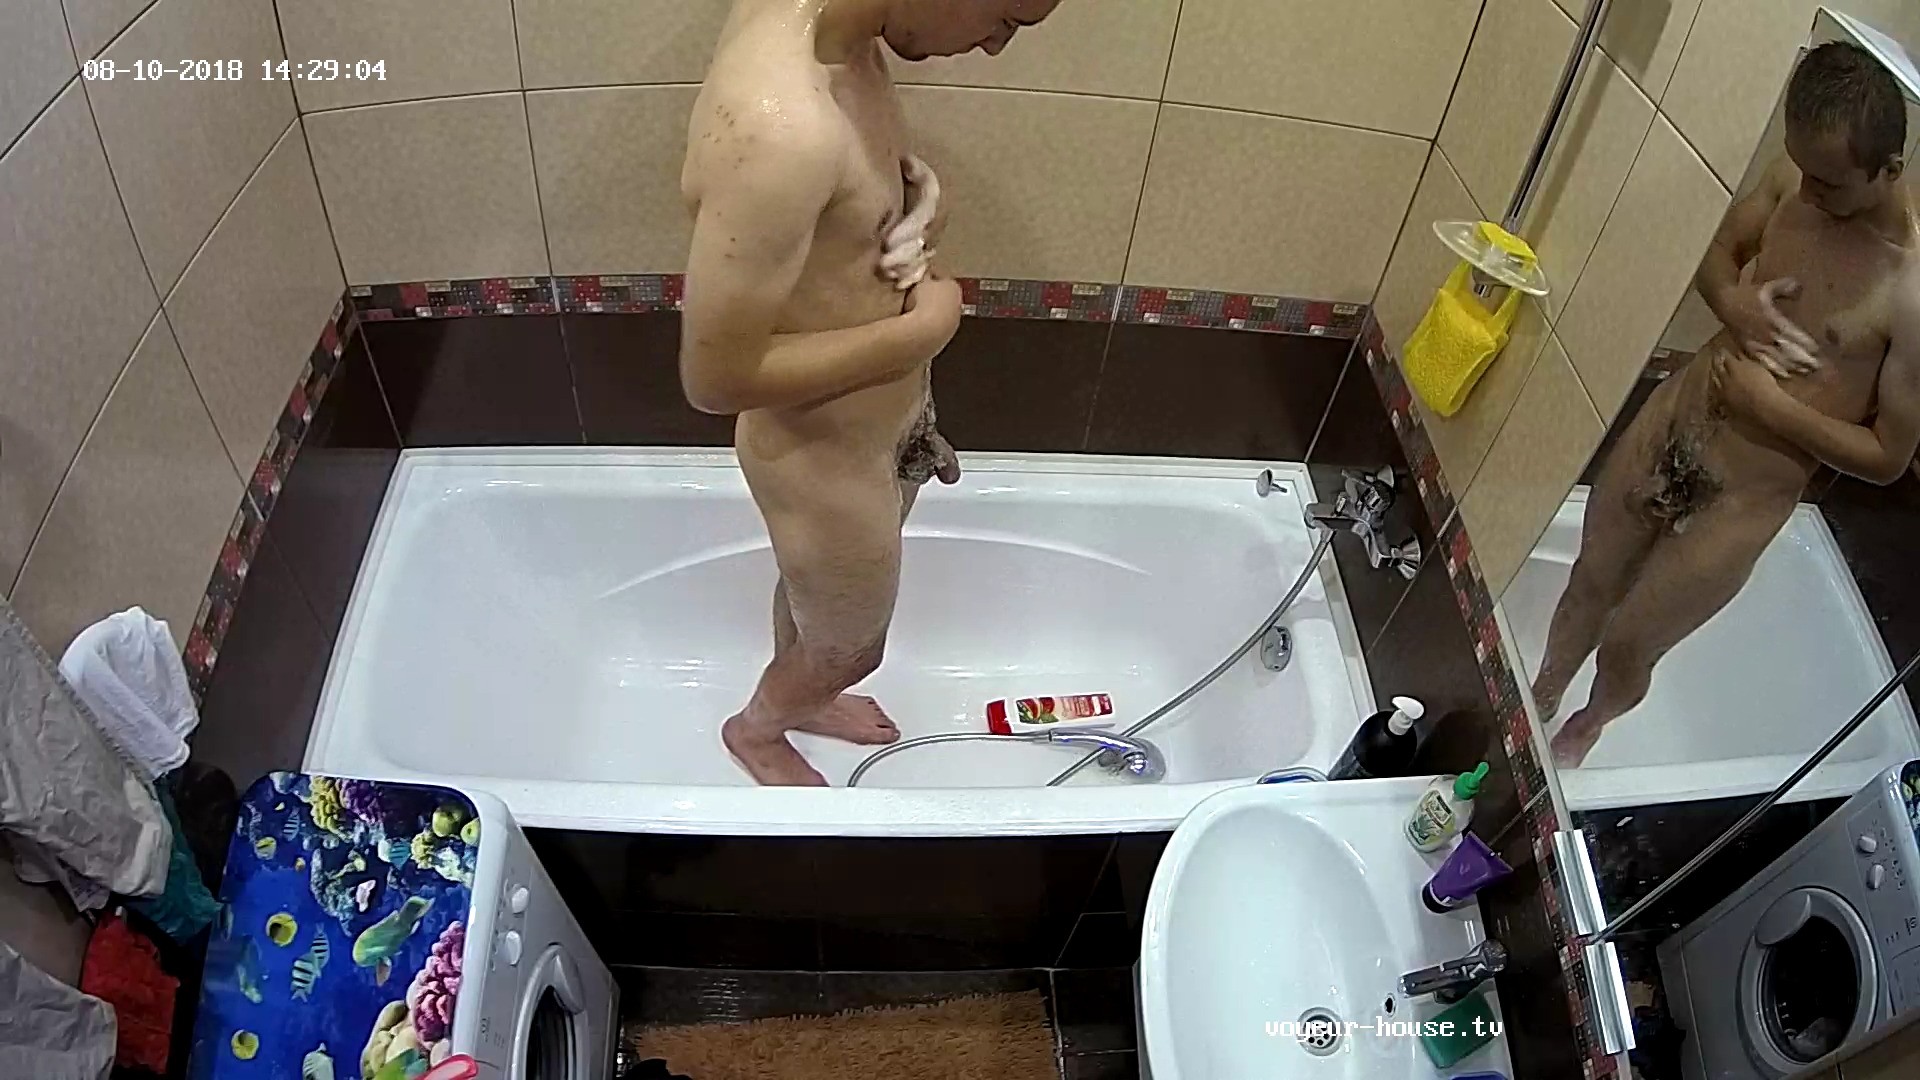 Guest guy afternoon shower 10th Aug 2018